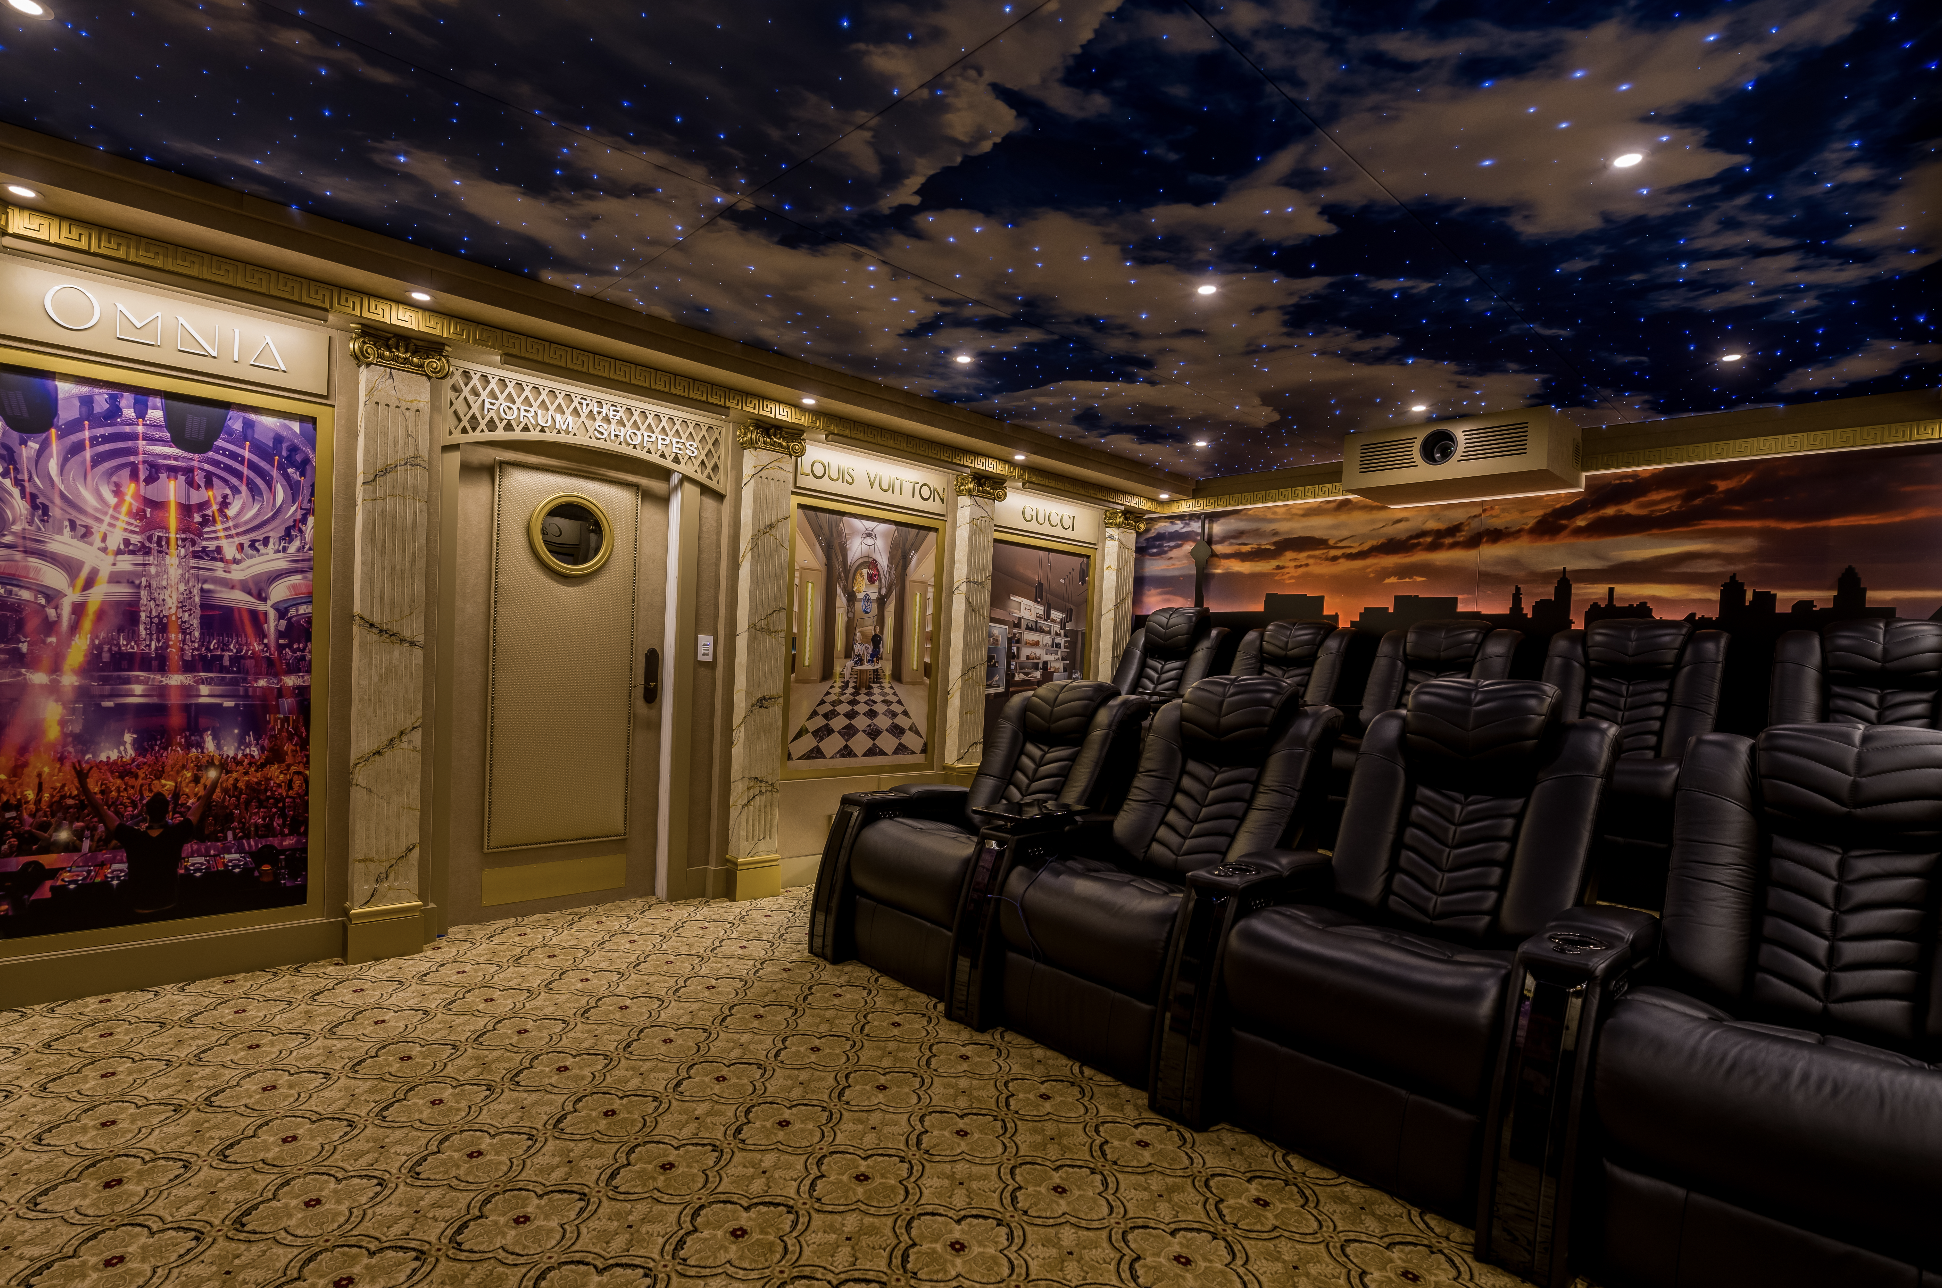 Las Vegas Theme Home Theater by Digital Installers South Bay Carpet